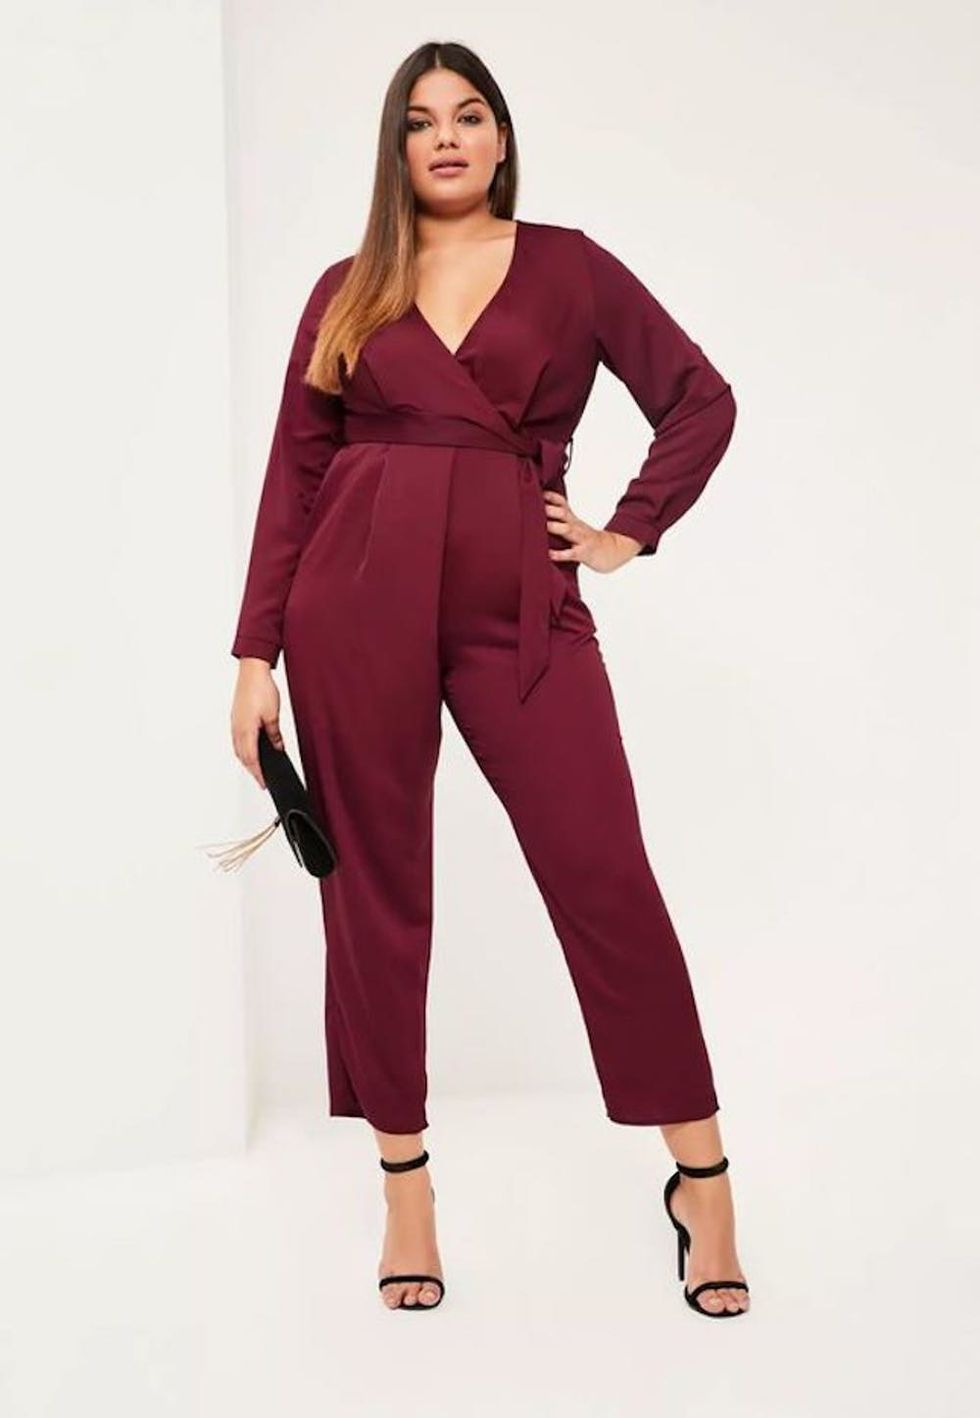 21 Plus-Size Essentials That’ll Reinvent Your Style in 2017 - Brit + Co